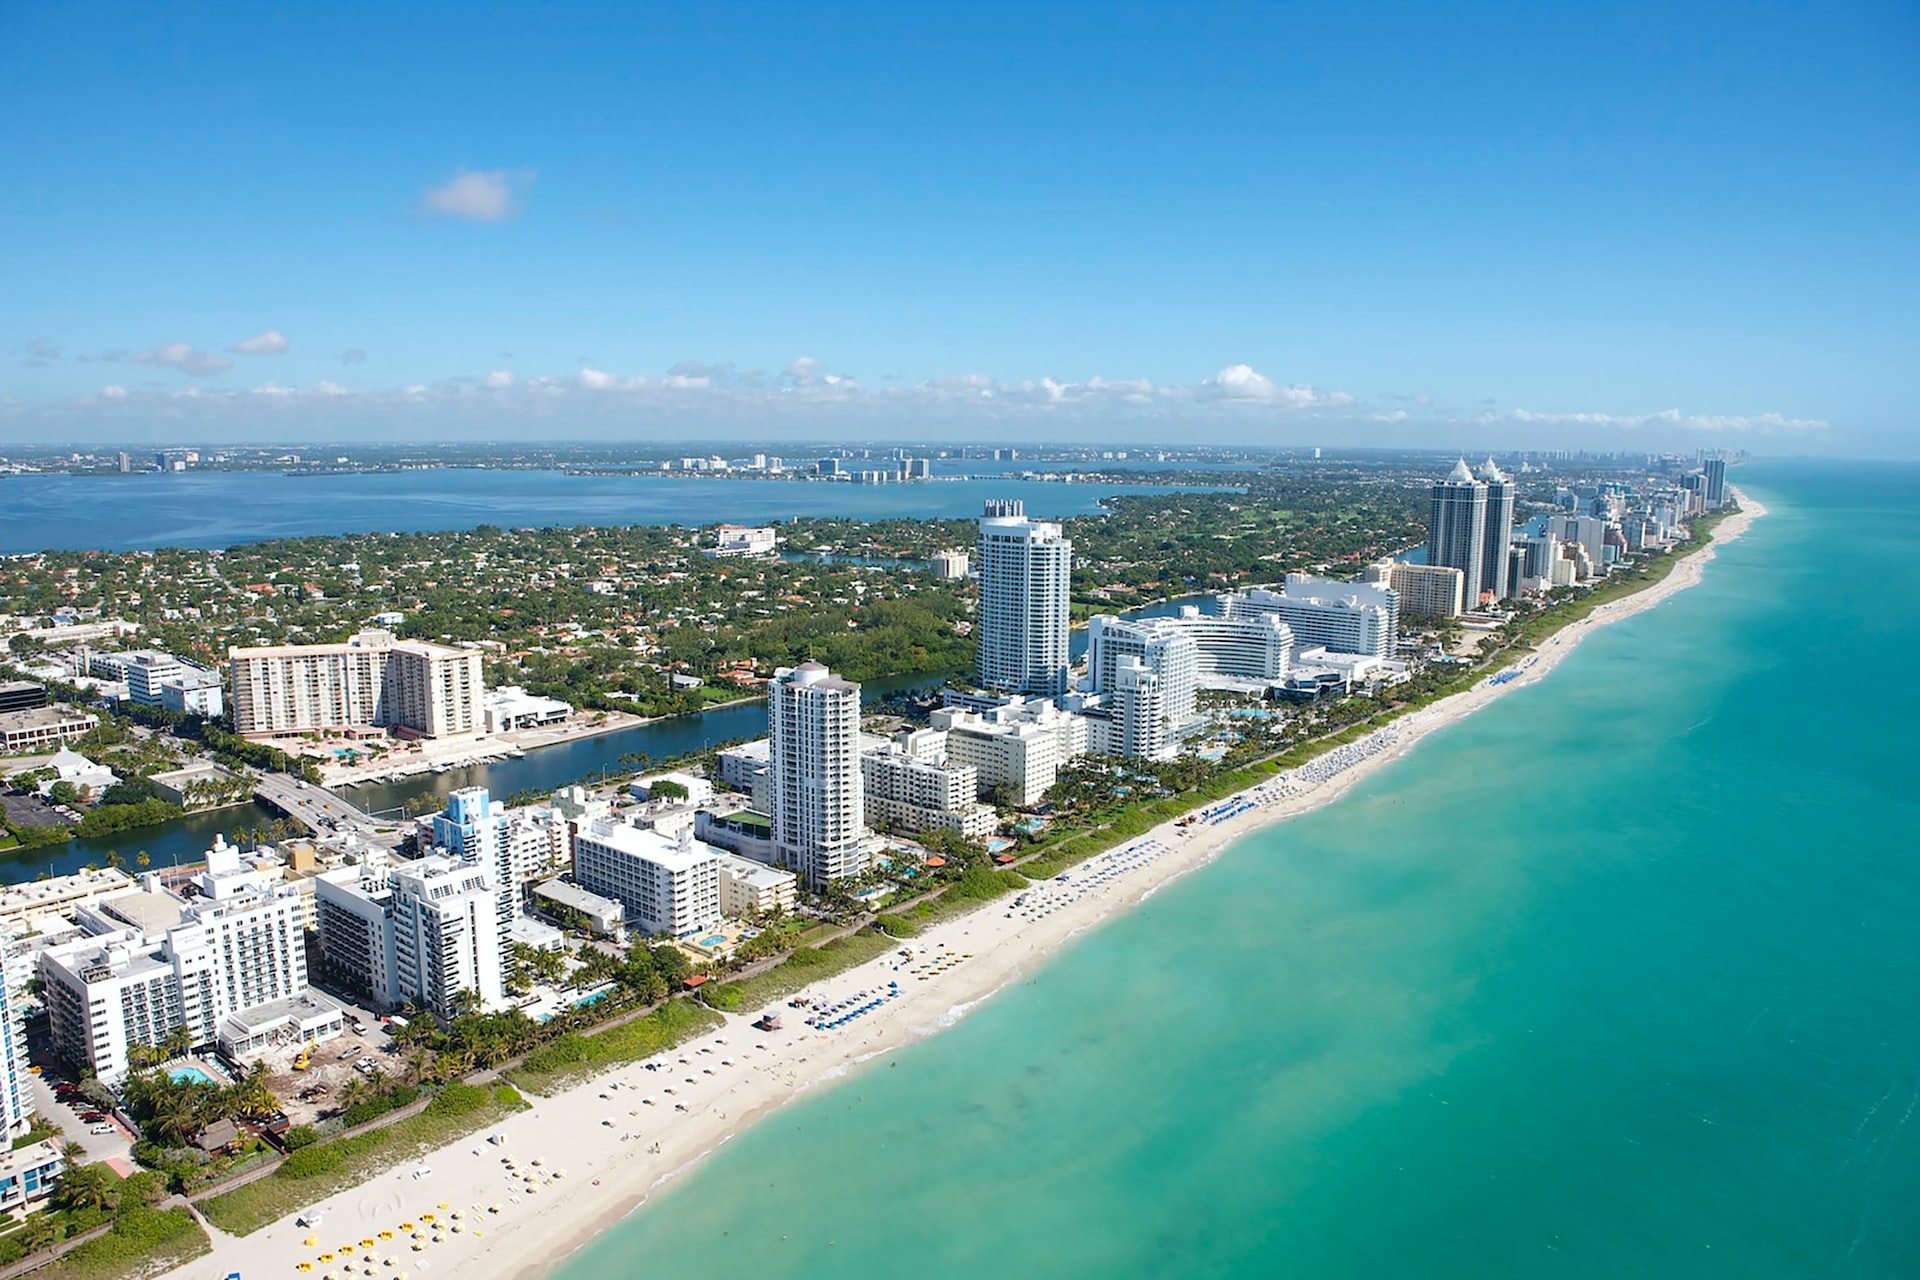 The long strand of beaches found along Miami's oceanfront.